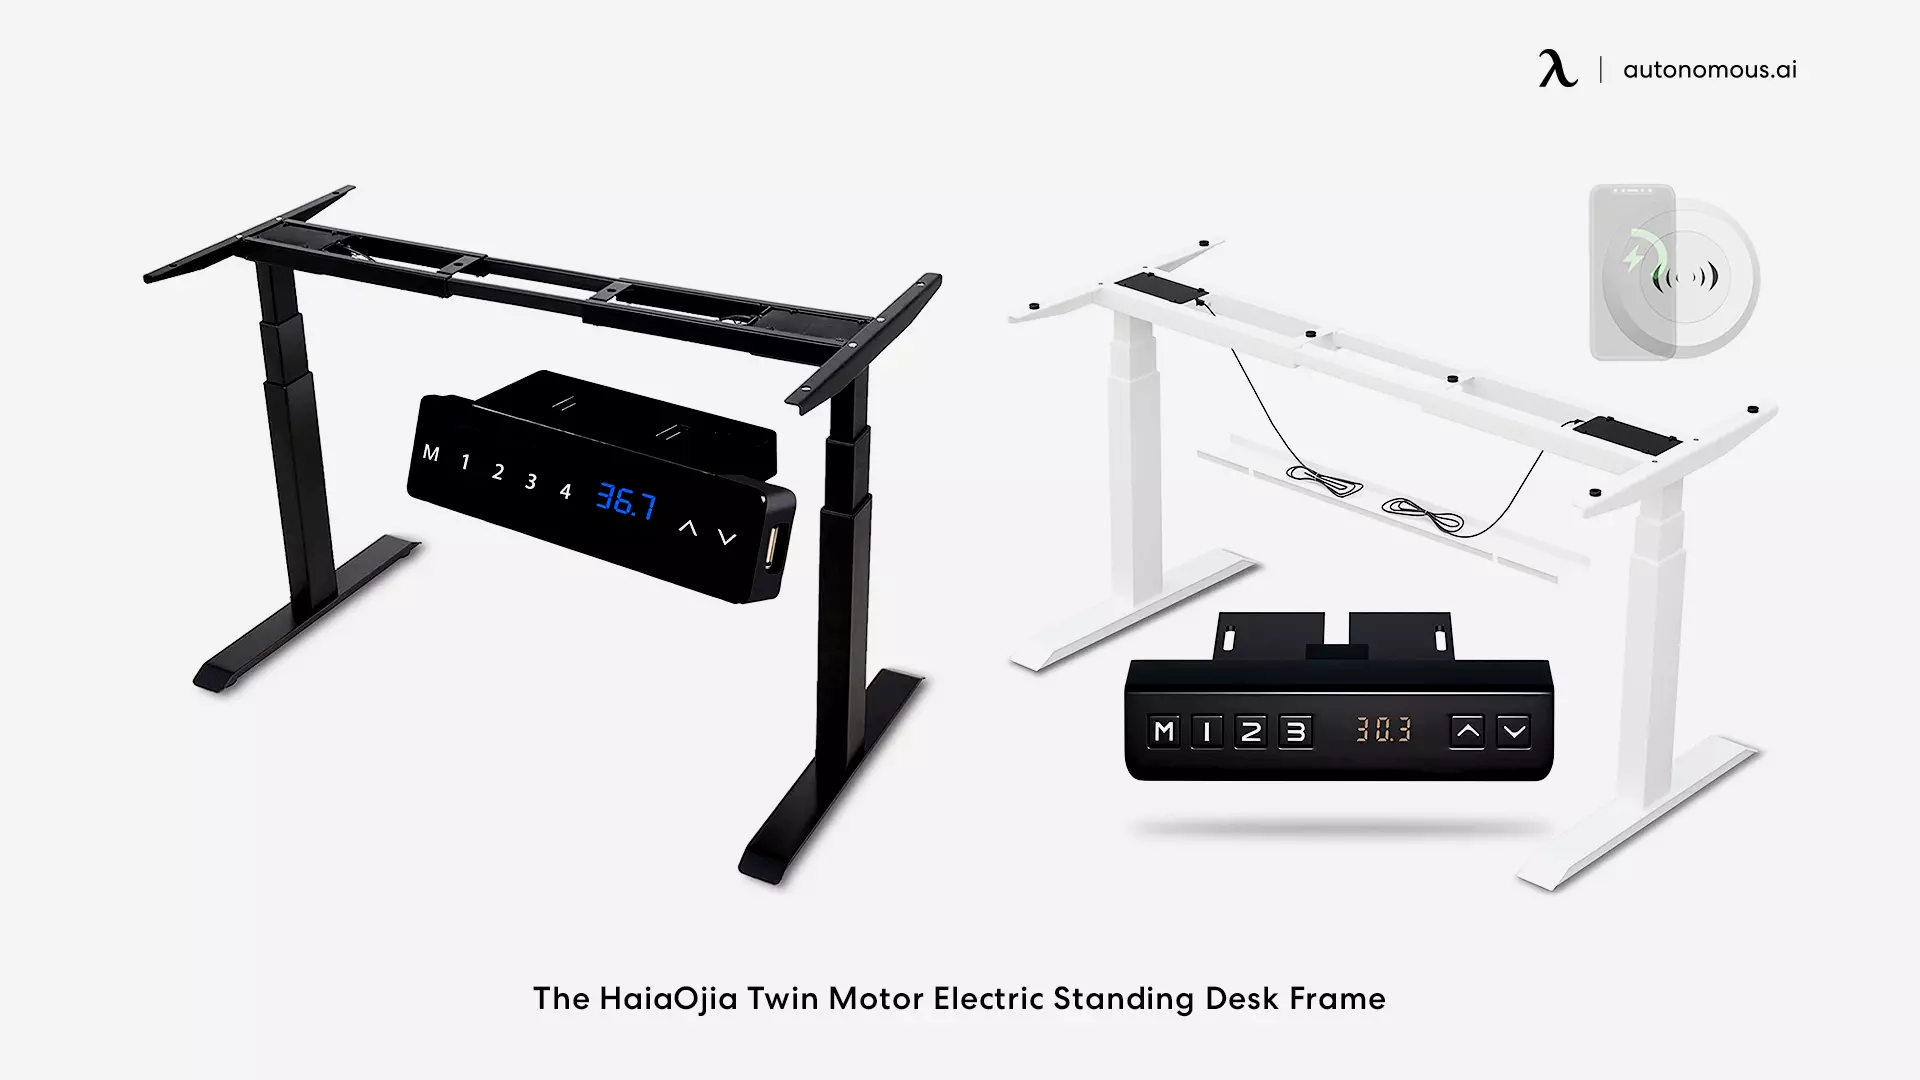 The HaiaOjia Twin Motor Electric Standing Desk Frame